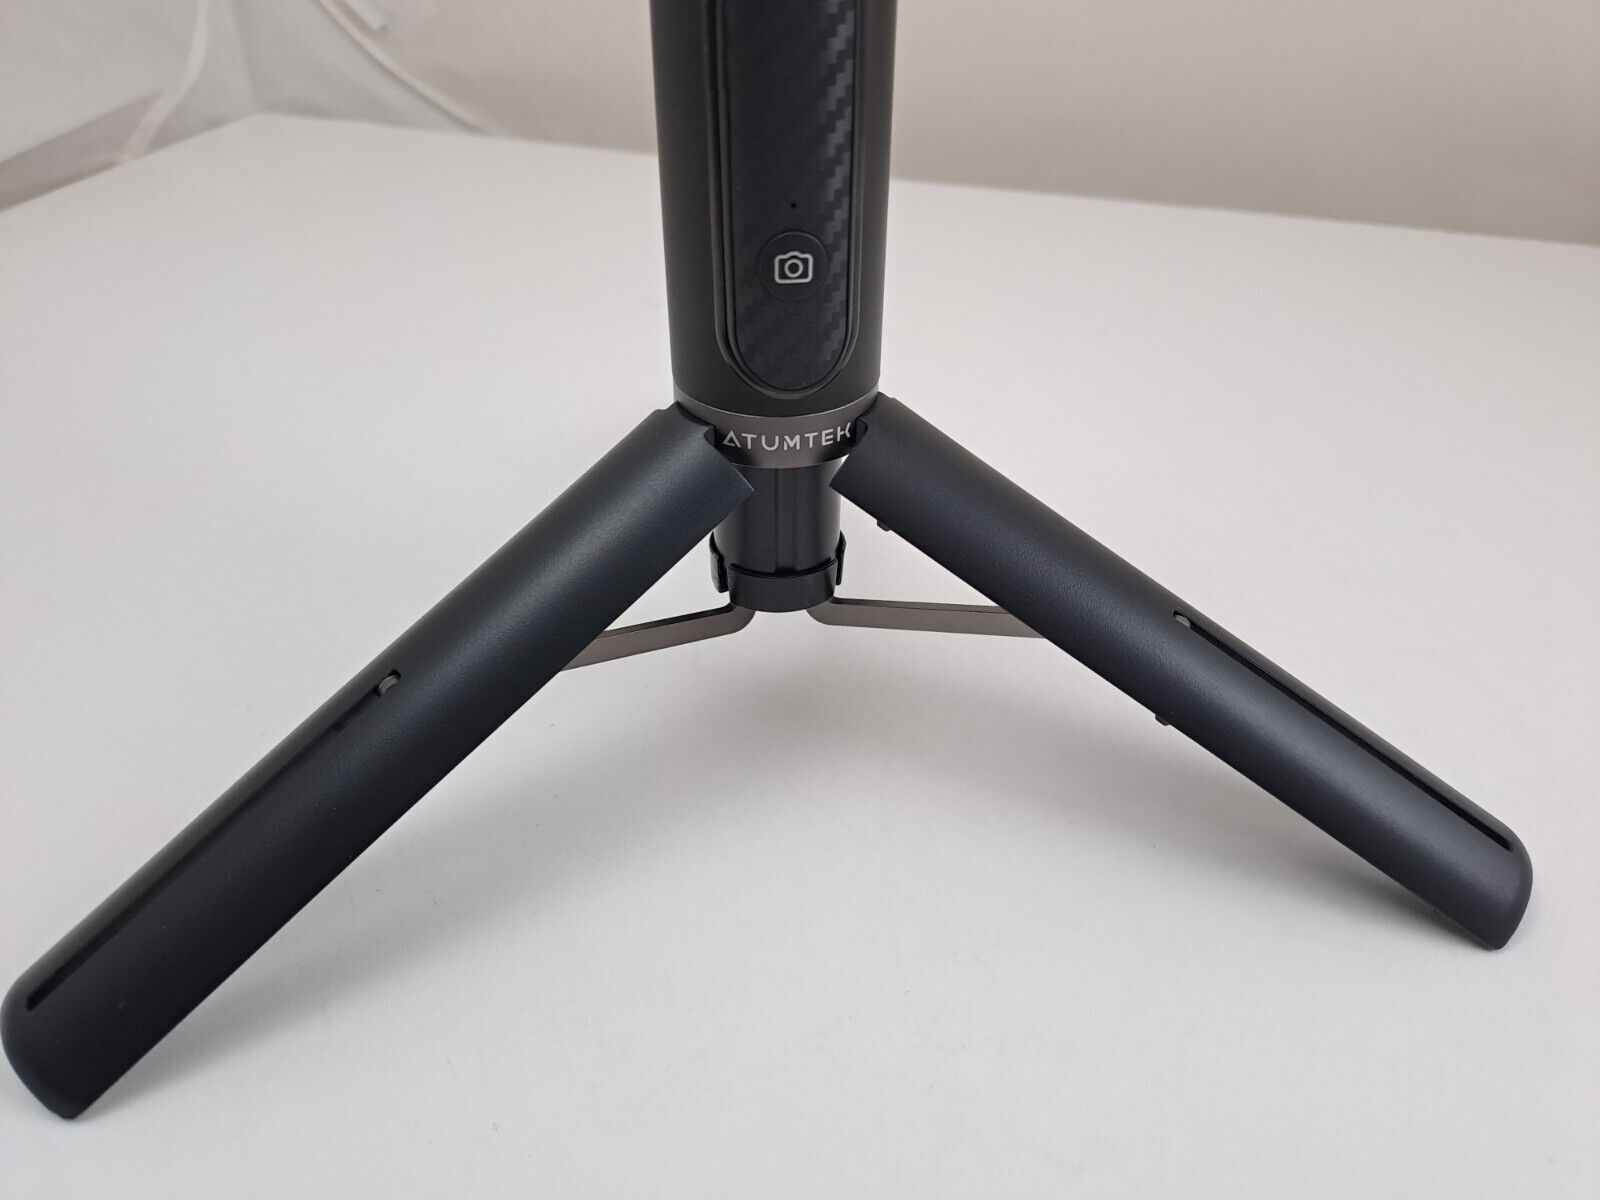 Atumtek Tripod Guide: Maximizing the Features and Functions of the